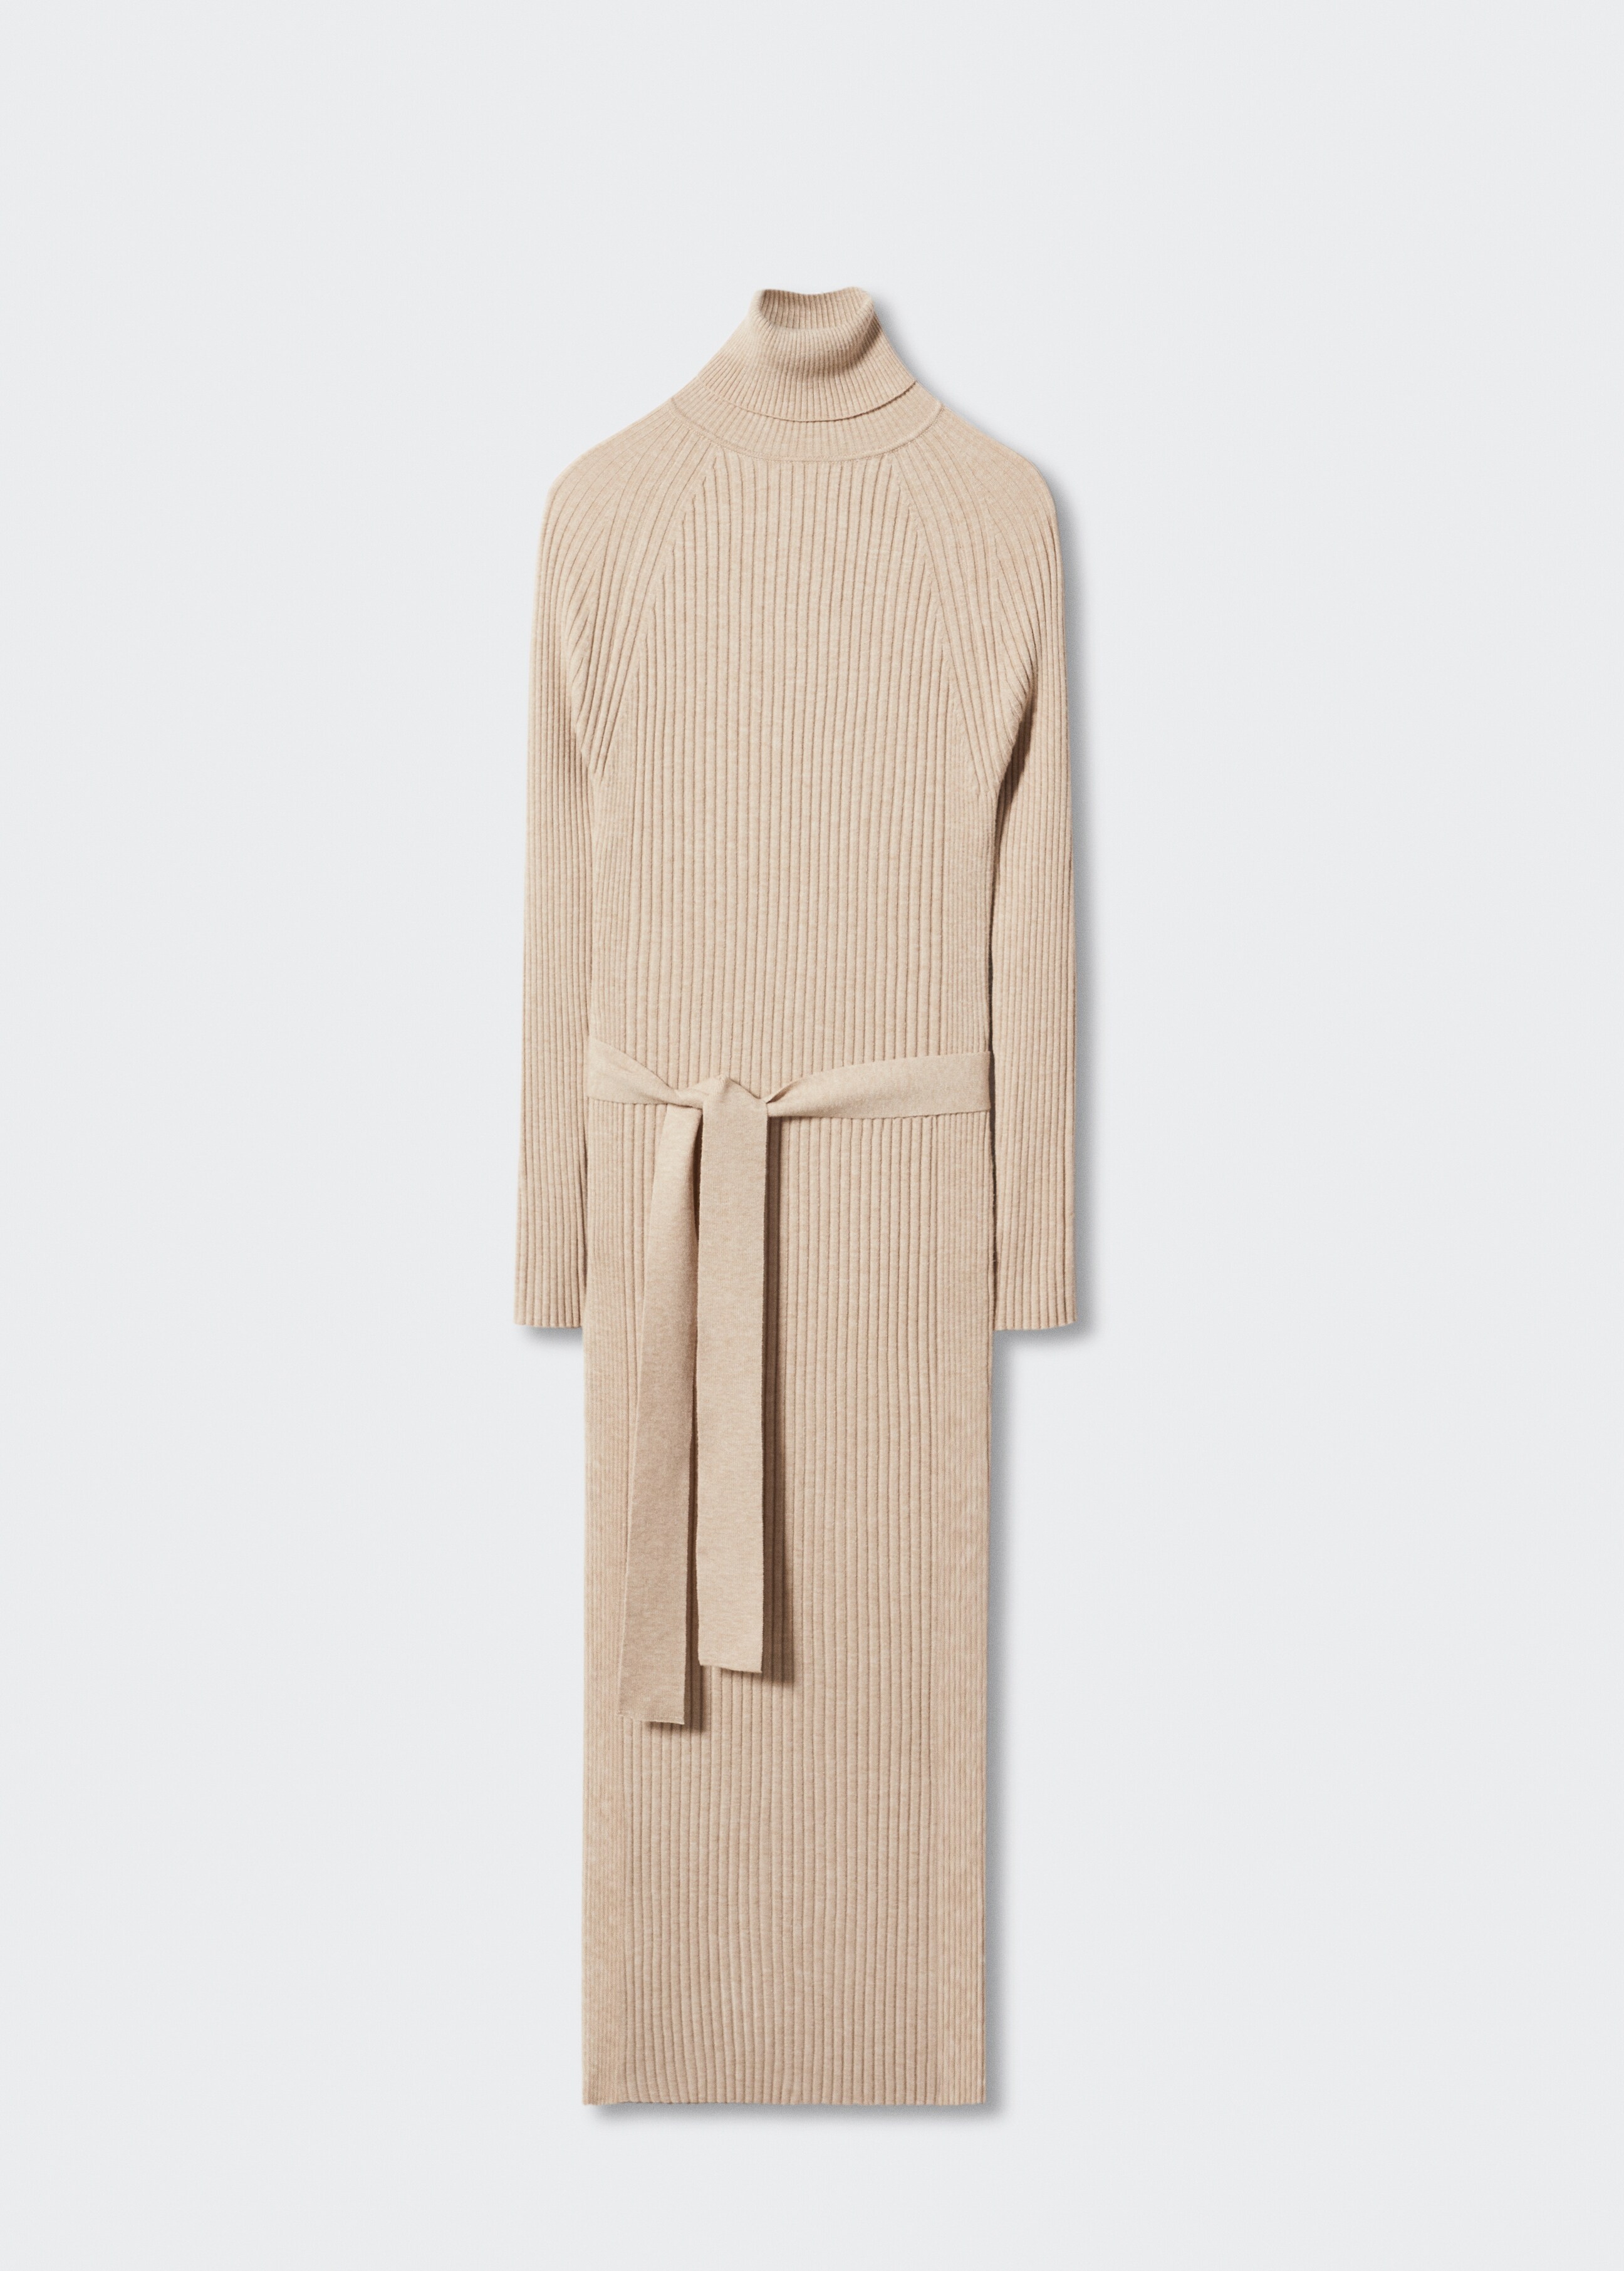 Ribbed dress with knot detail - Article without model